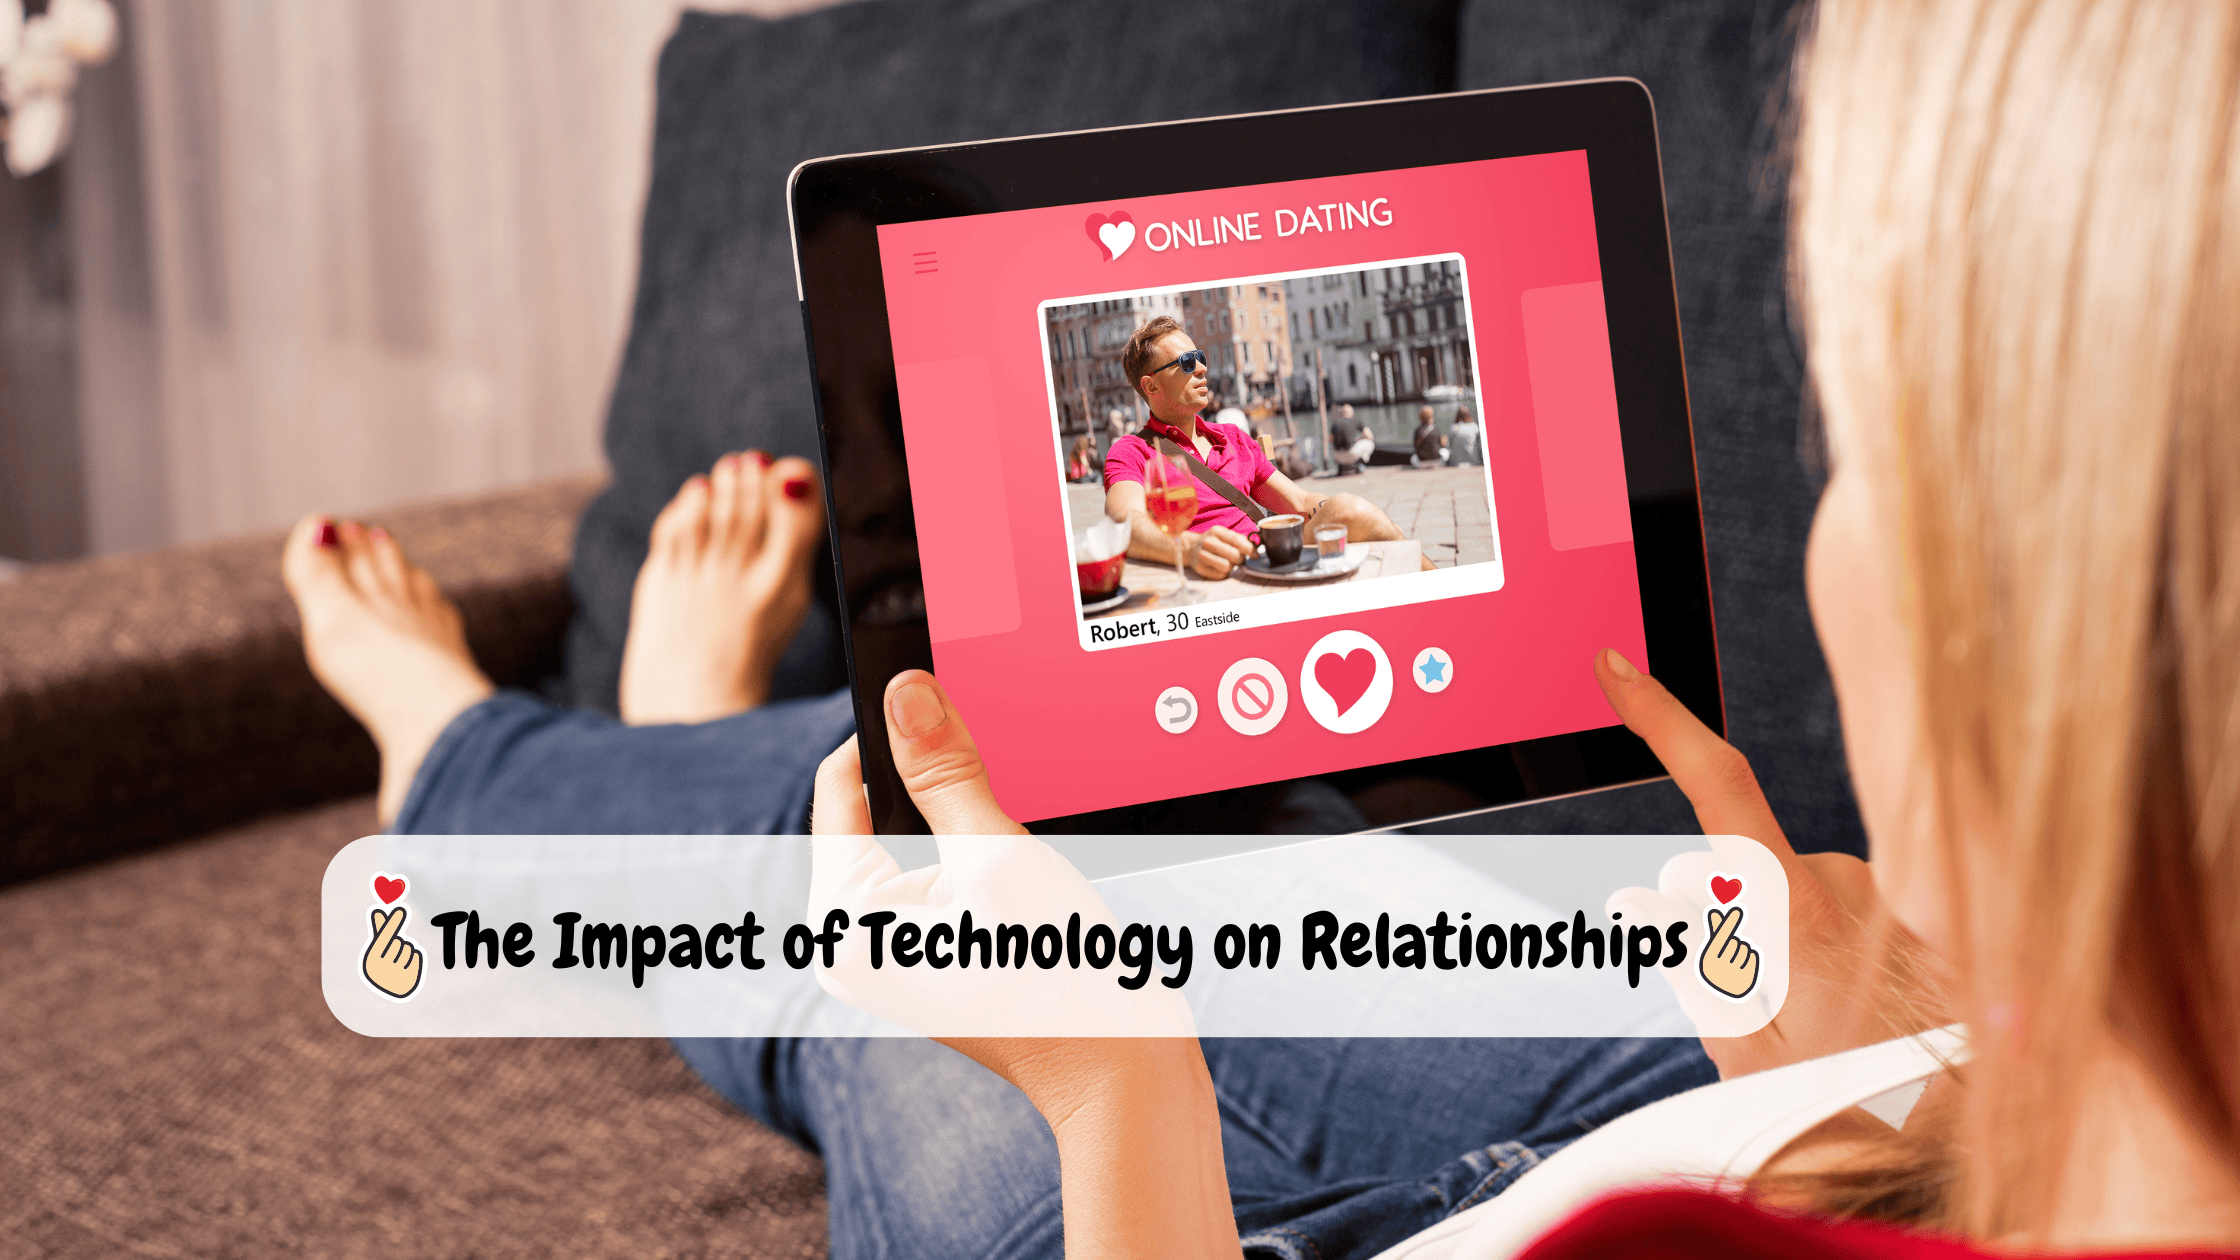 The impact of technology on relationships